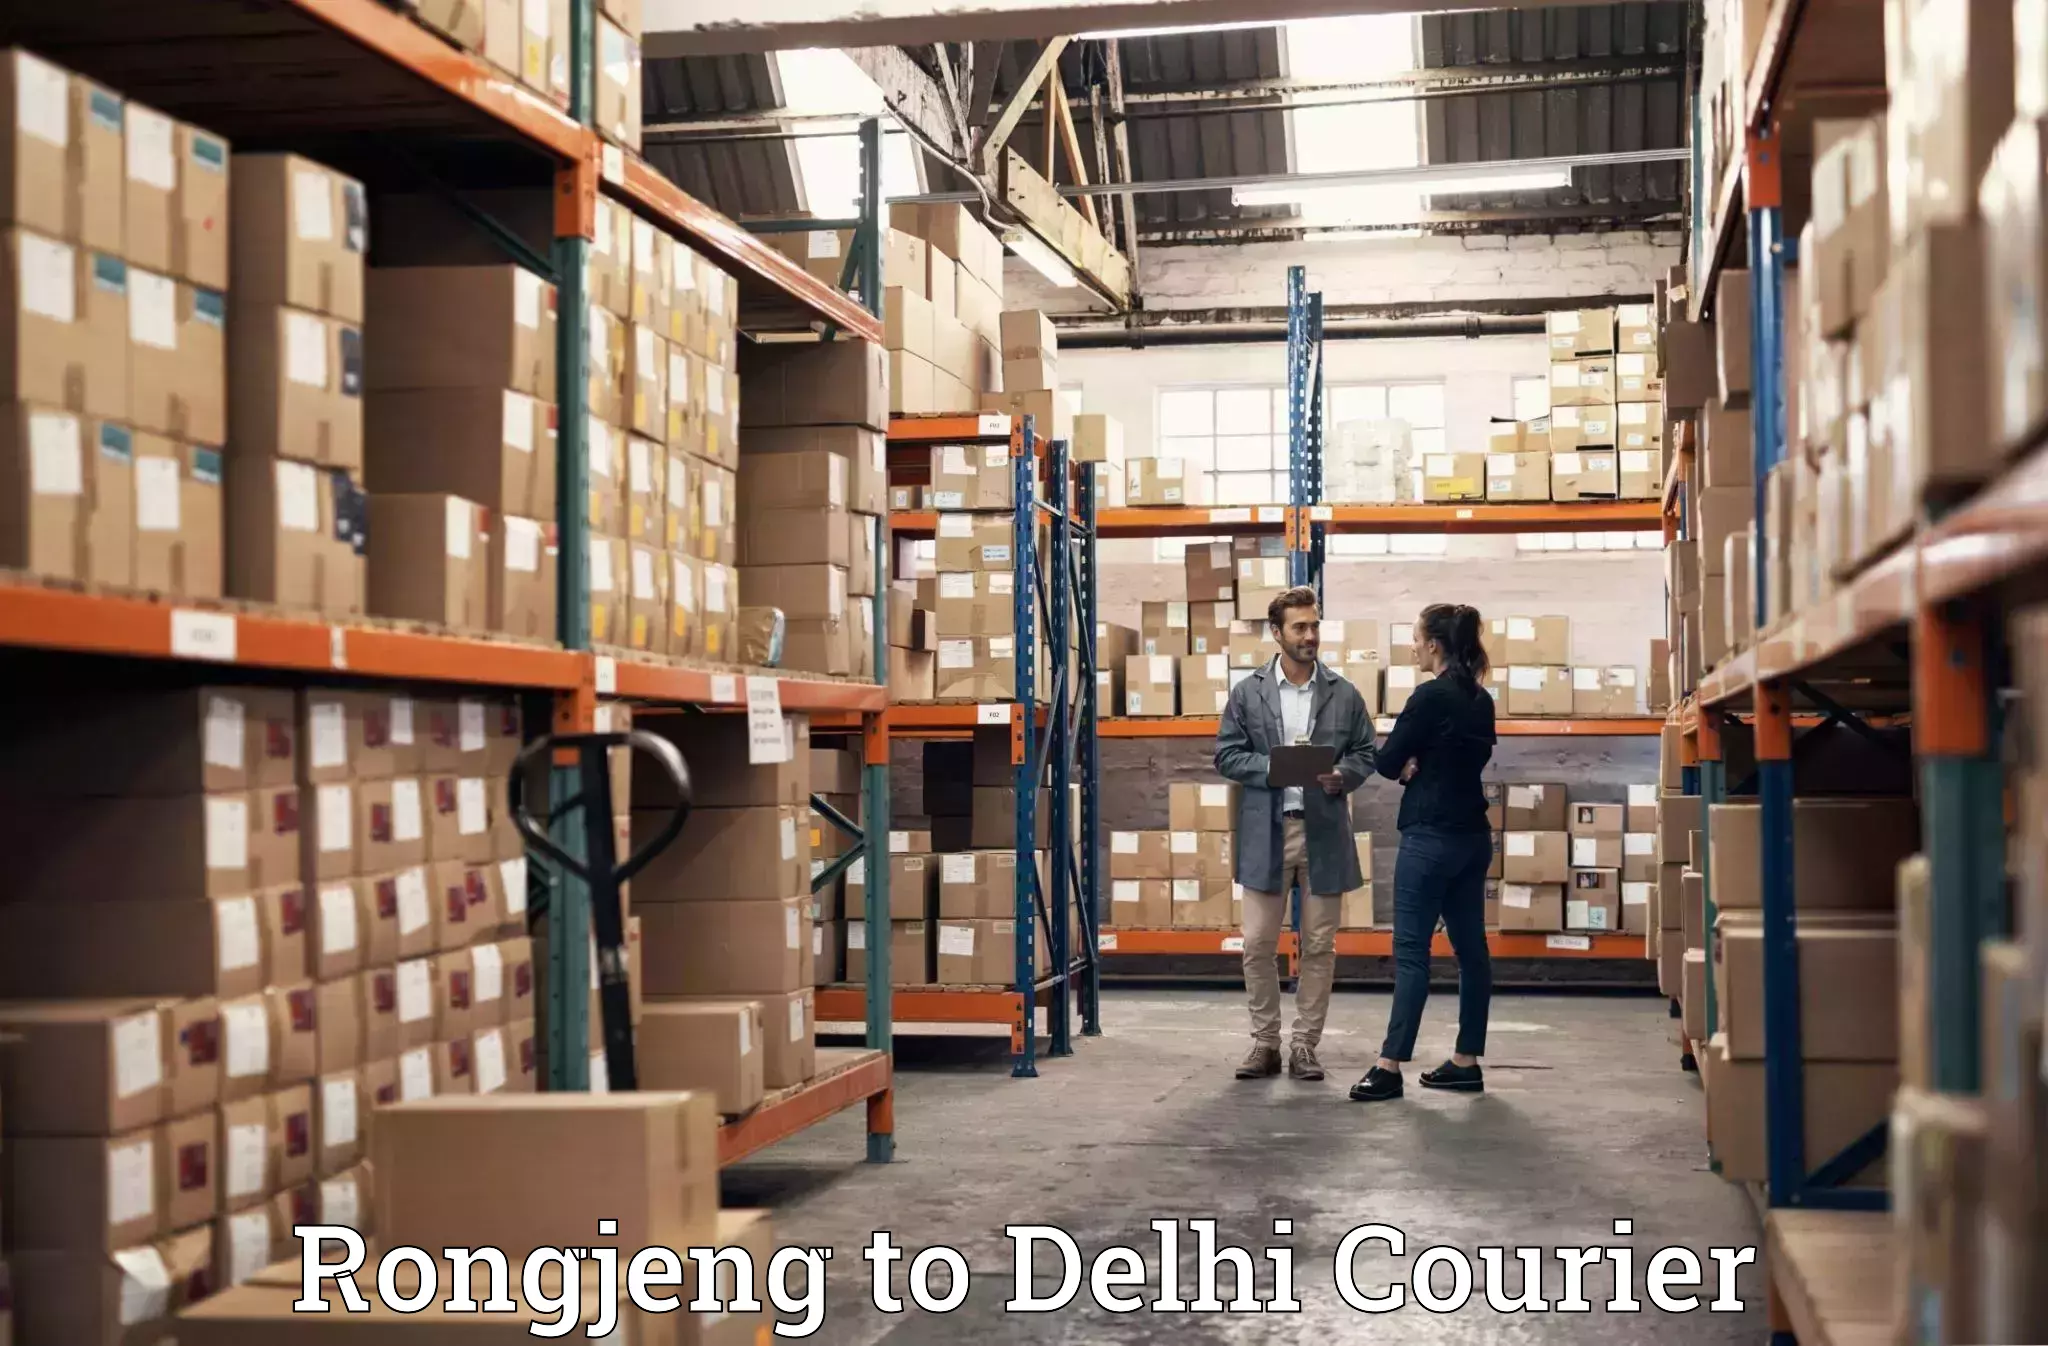 Furniture transport specialists Rongjeng to Delhi